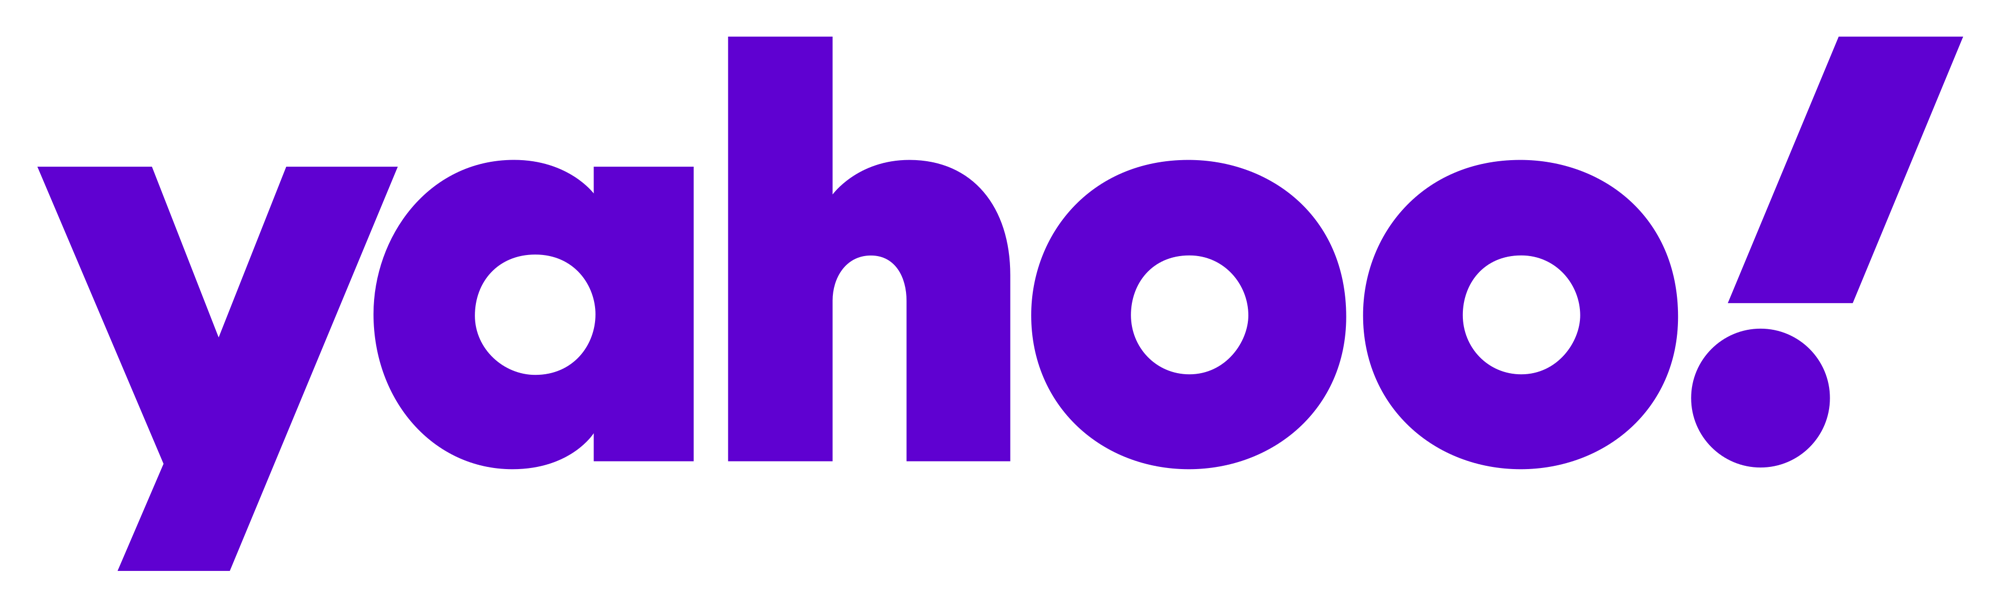 New logo and identity for Yahoo! by Pentagram